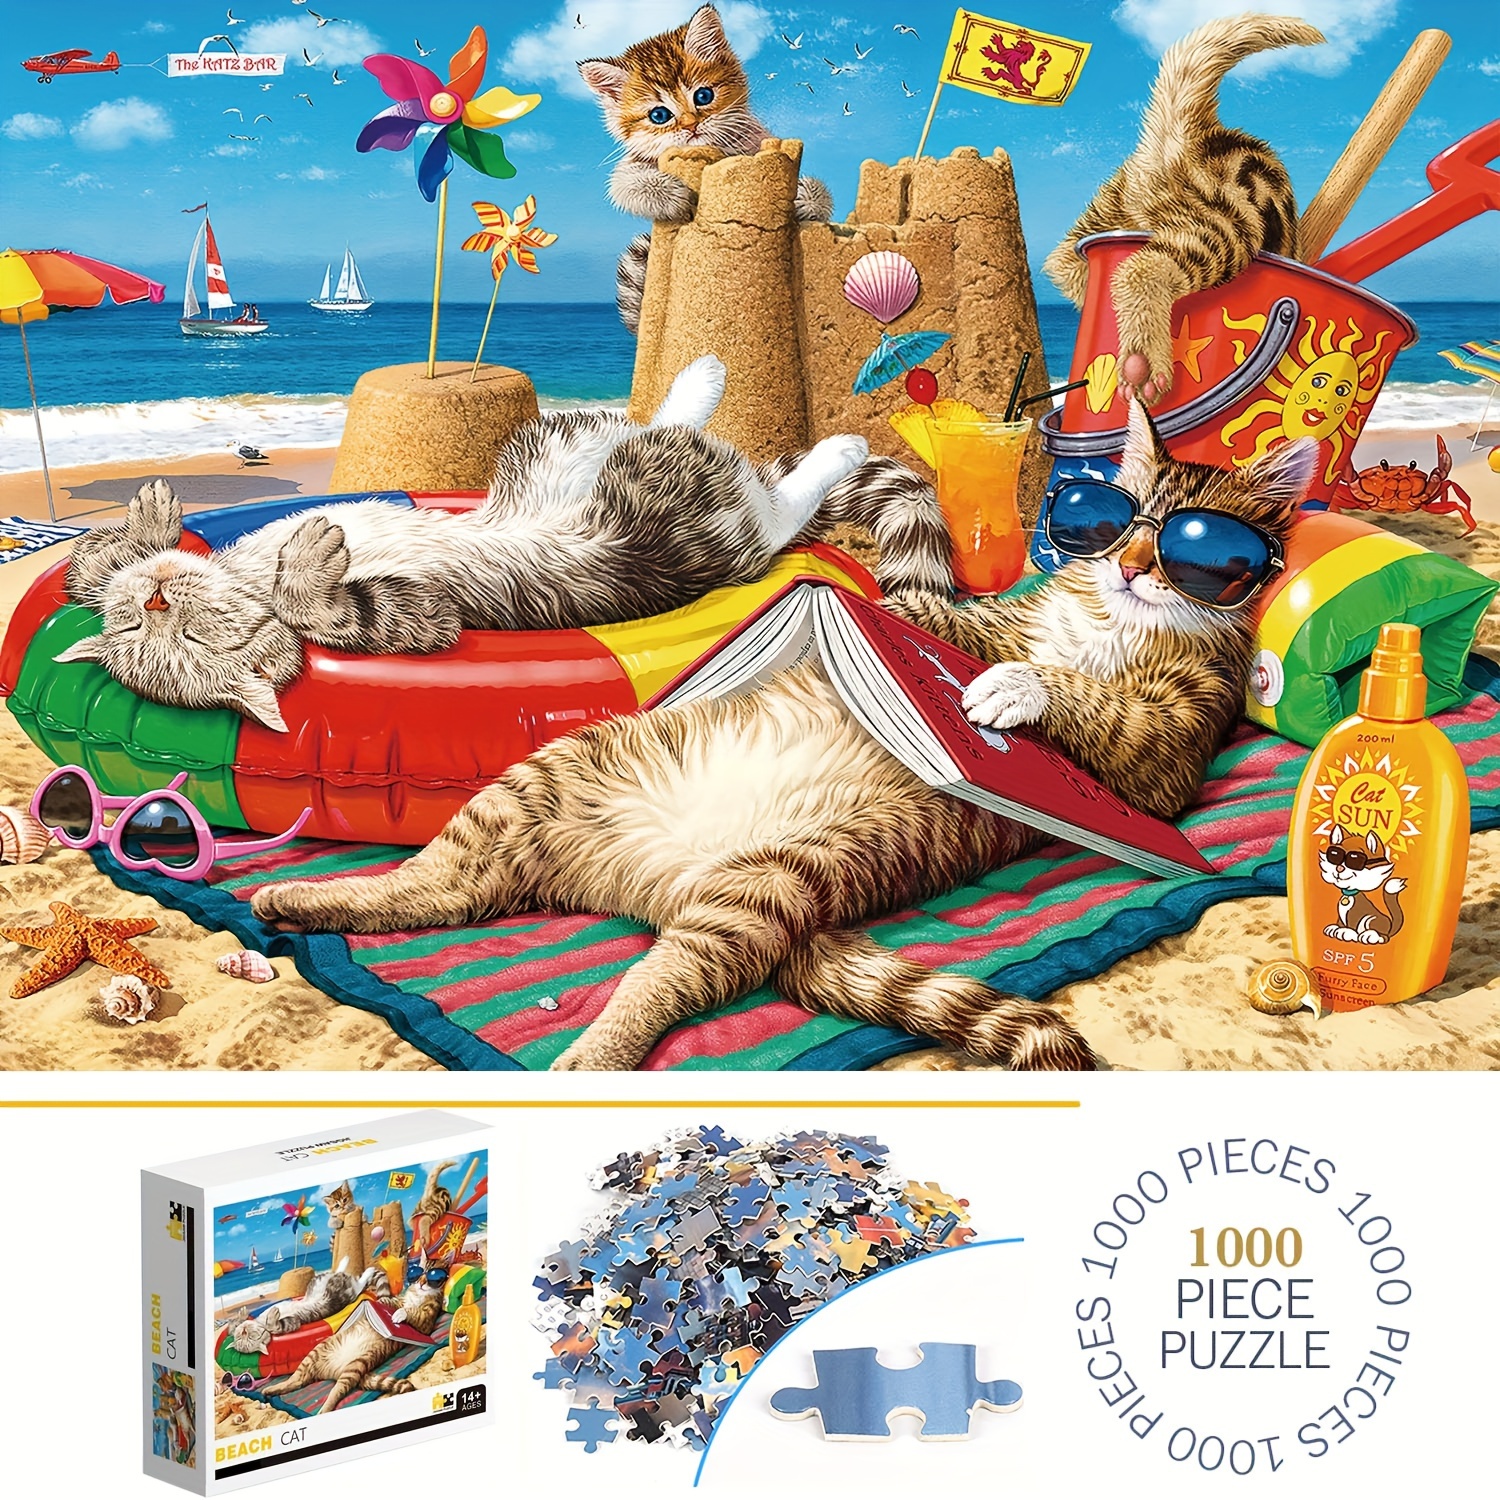 

1000pcs Beach Cats Puzzles, Thick And Durable Seamless Jigsaw Puzzles For Adults Premium Quality Fun Family Challenging Puzzles For Birthday, Christmas, Halloween, Thanksgiving, Easter